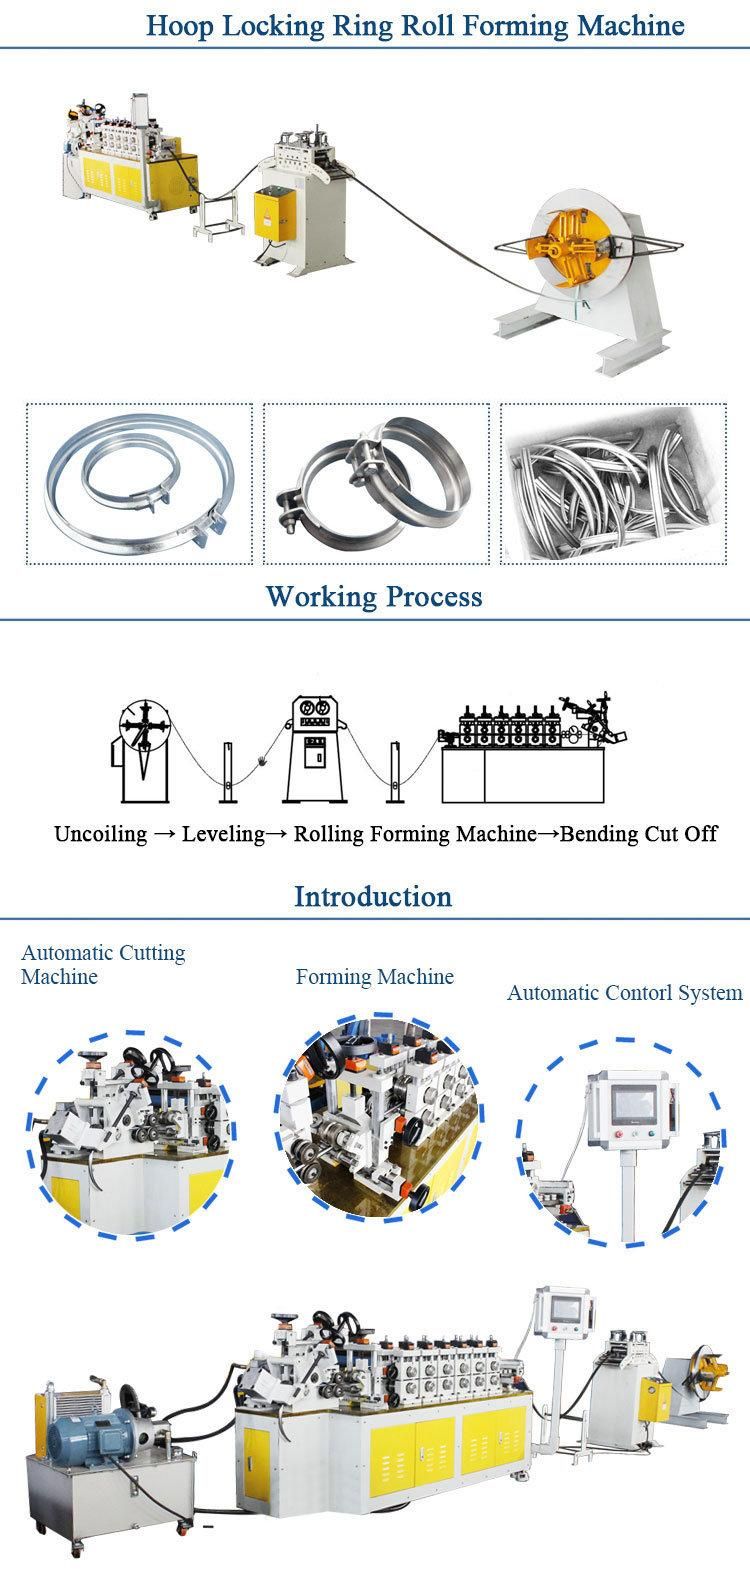 Best Selling High Precision PLC Control Lock Clamp Ring Forming Machine